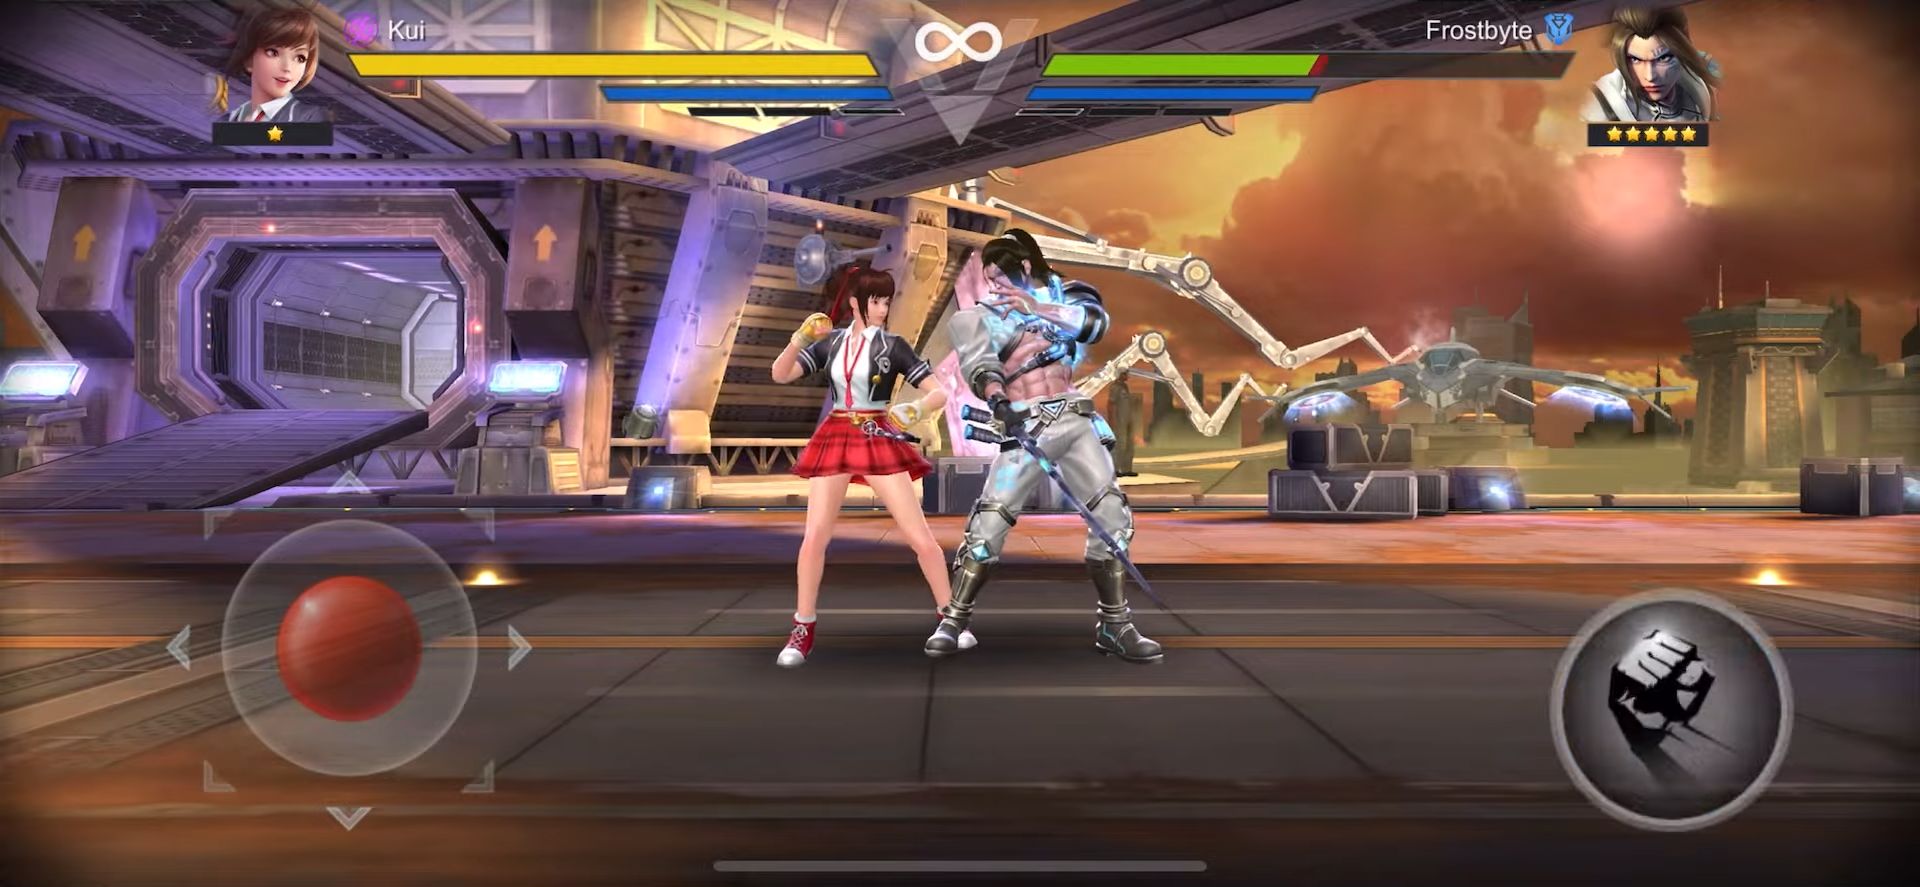 Download Final Fighter: Fighting Game Android free game.